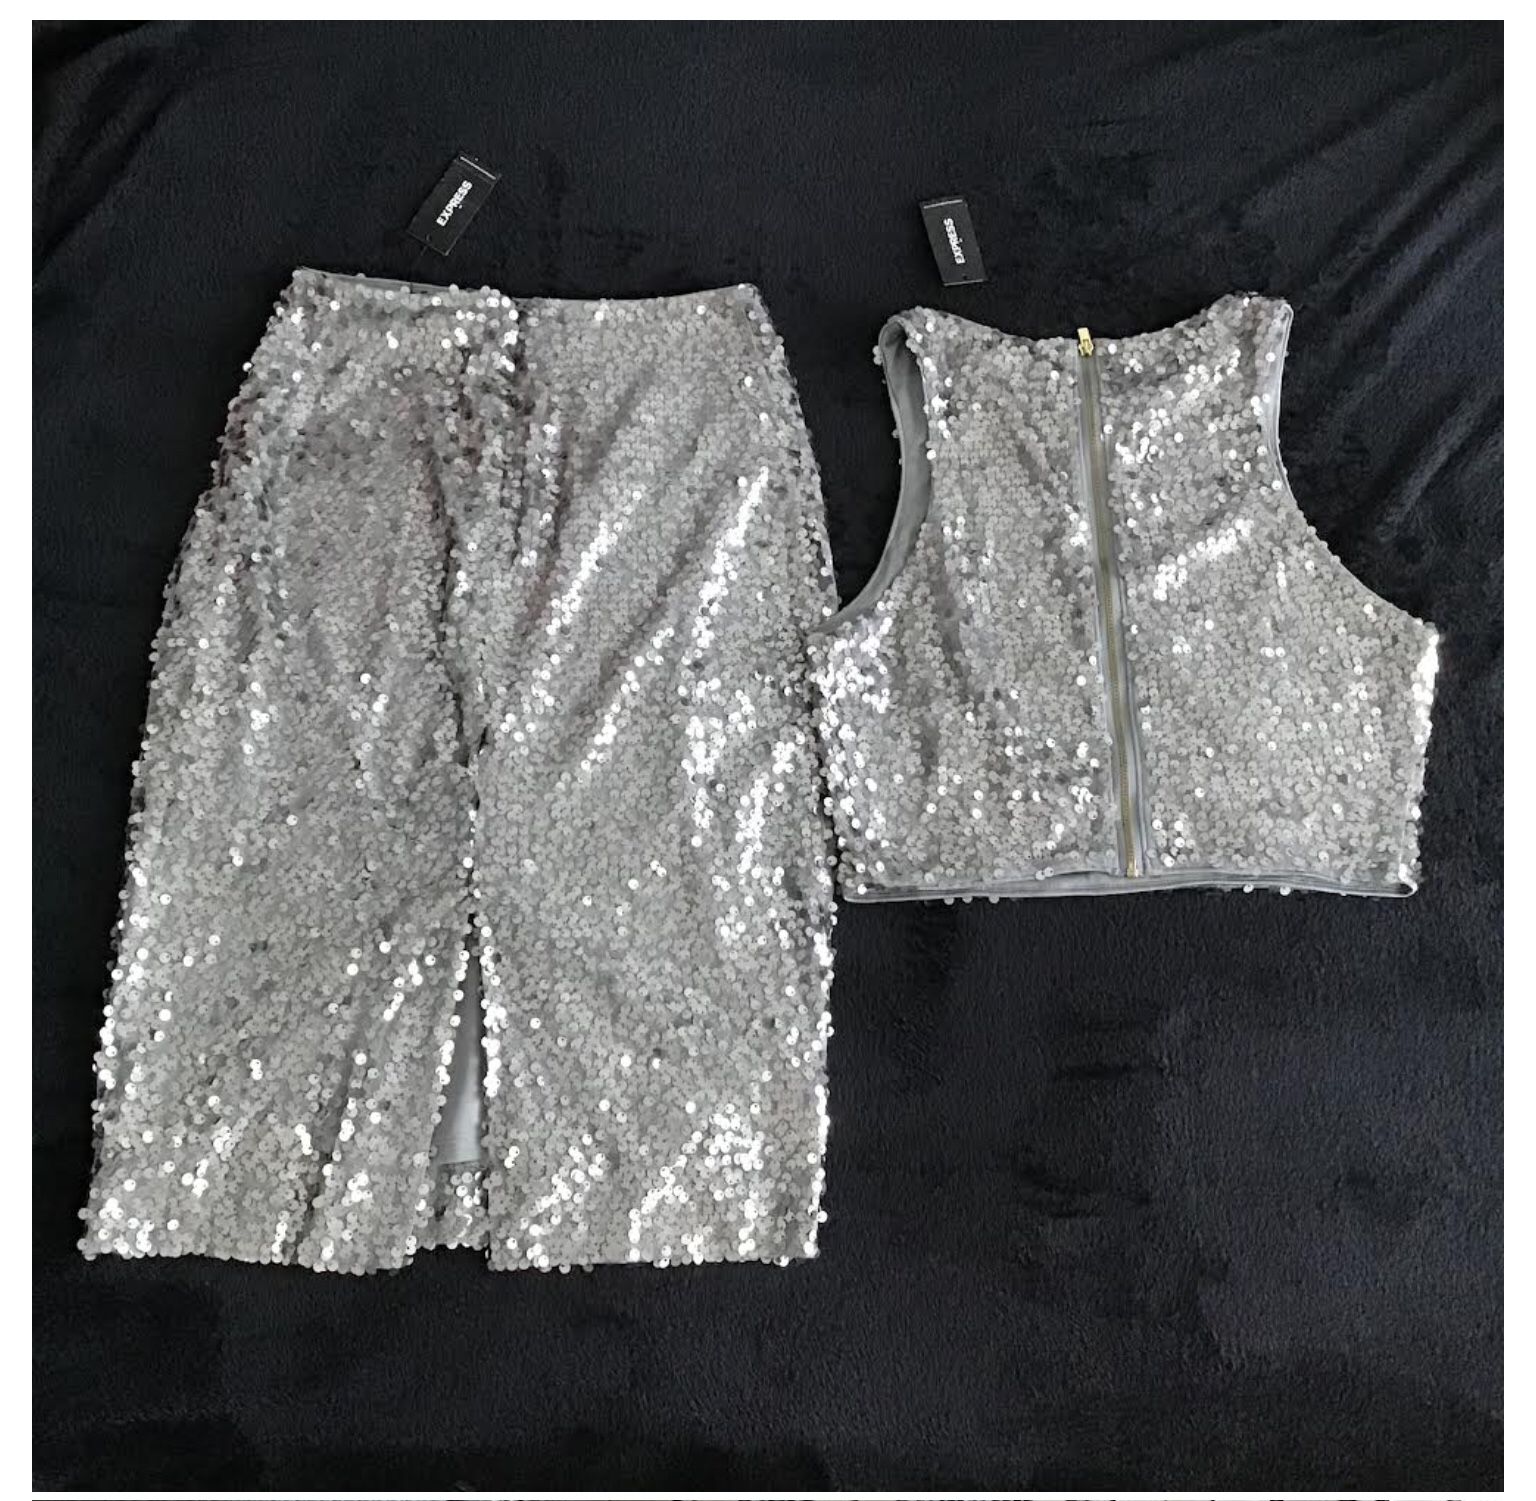 EXPRESS silver grey sequin pencil skirt and crop top NEW WITH TAGS